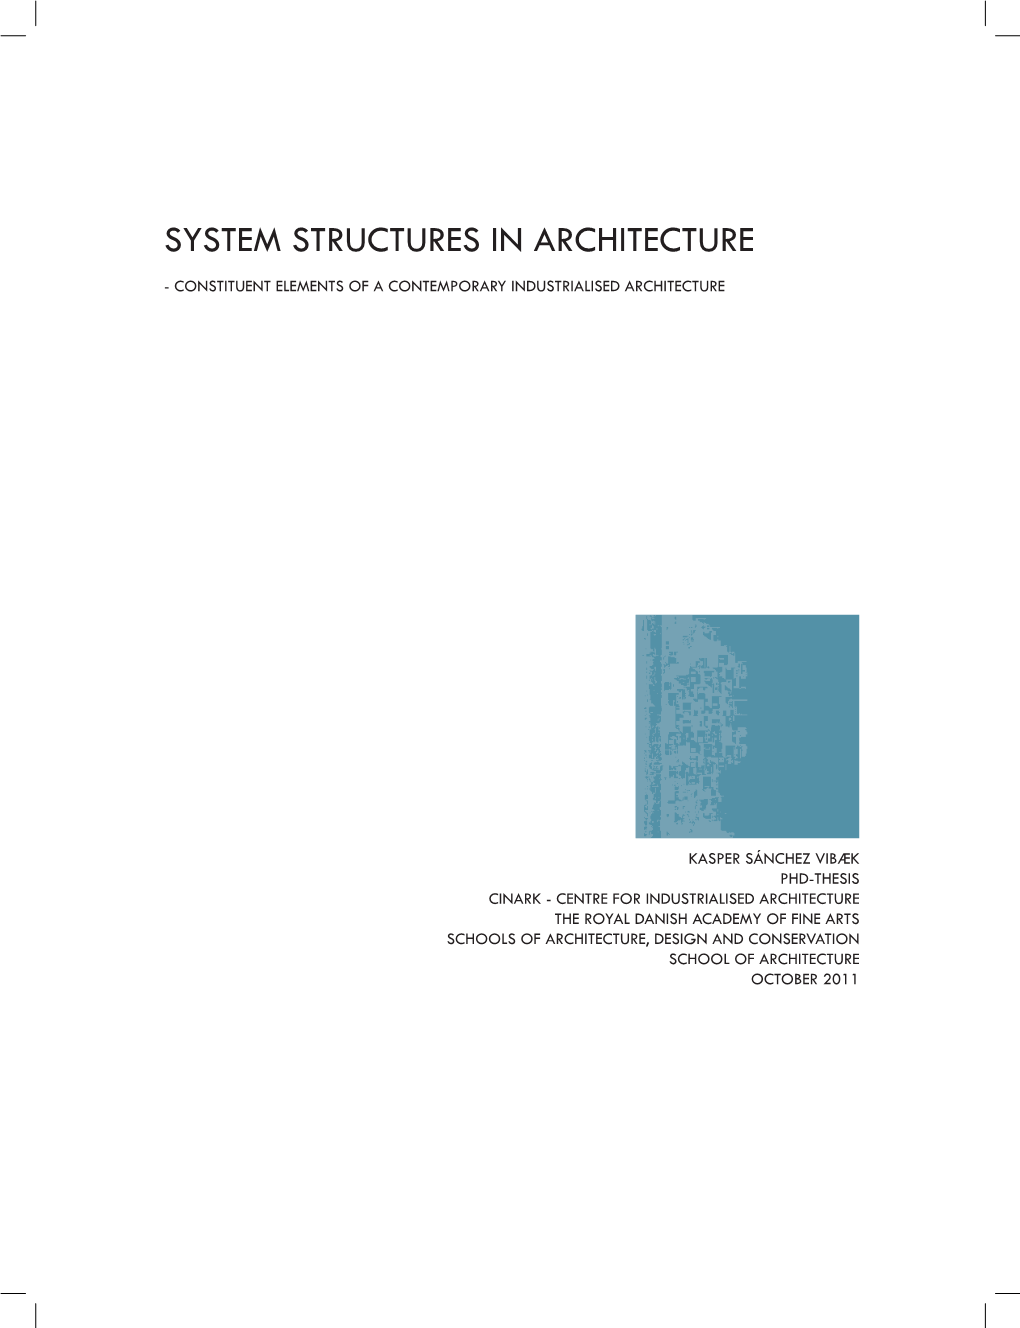 System Structures in Architecture